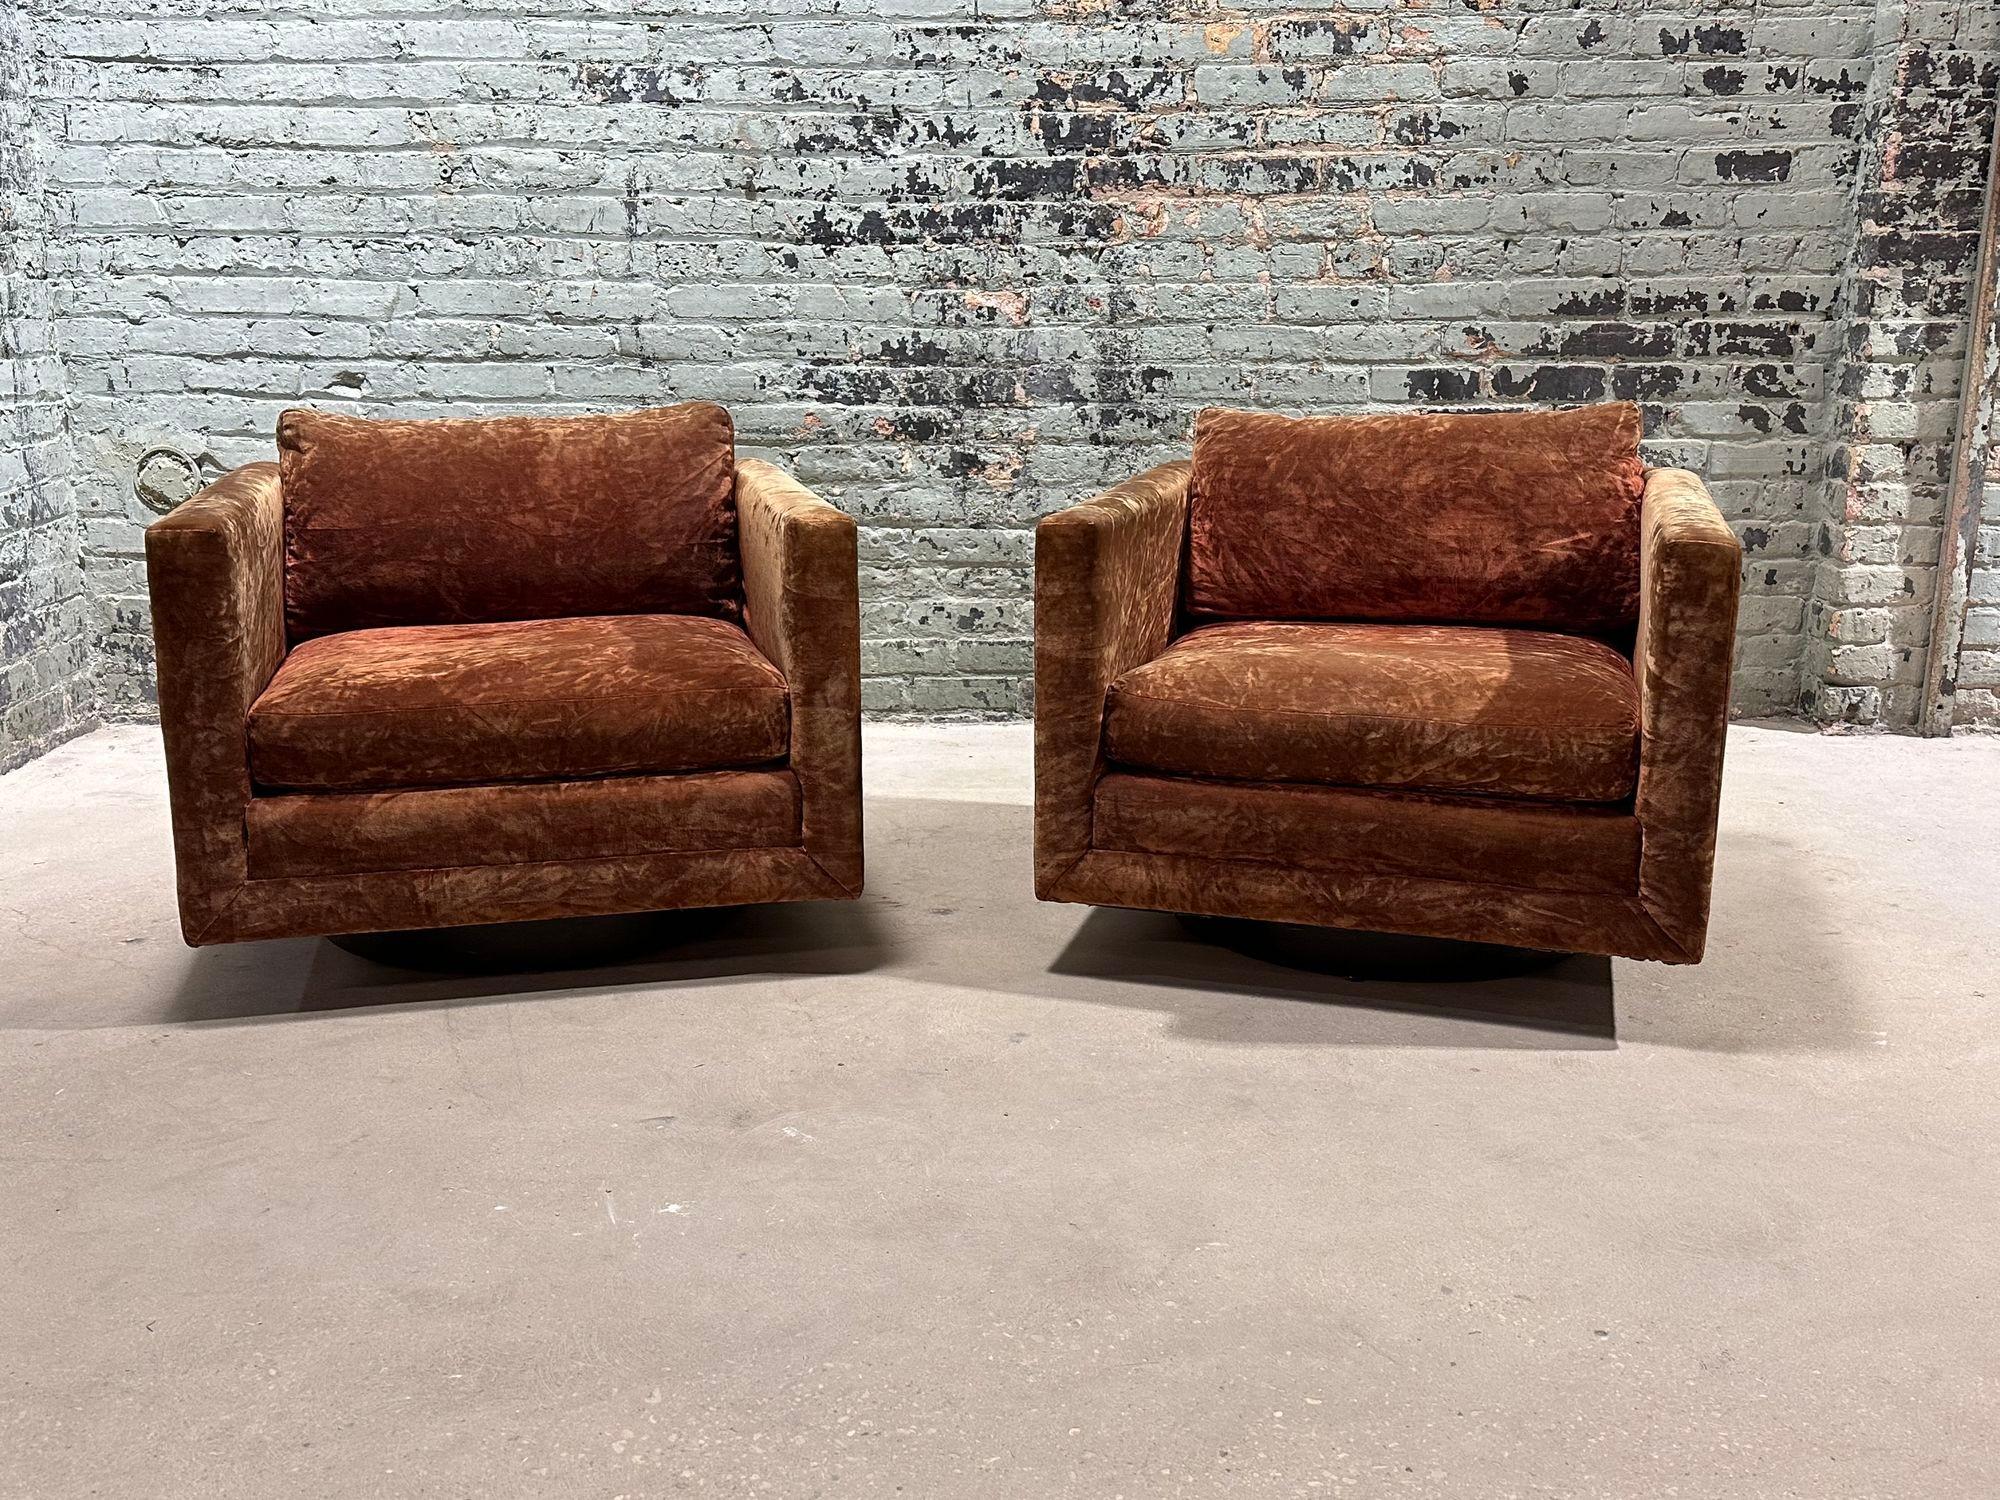 Harvey Probber Pair Swivel Cube Lounge Club Chairs, #1461, 1960. Original crushed velvet. There is some minor sun fading to the original crushed velvet.